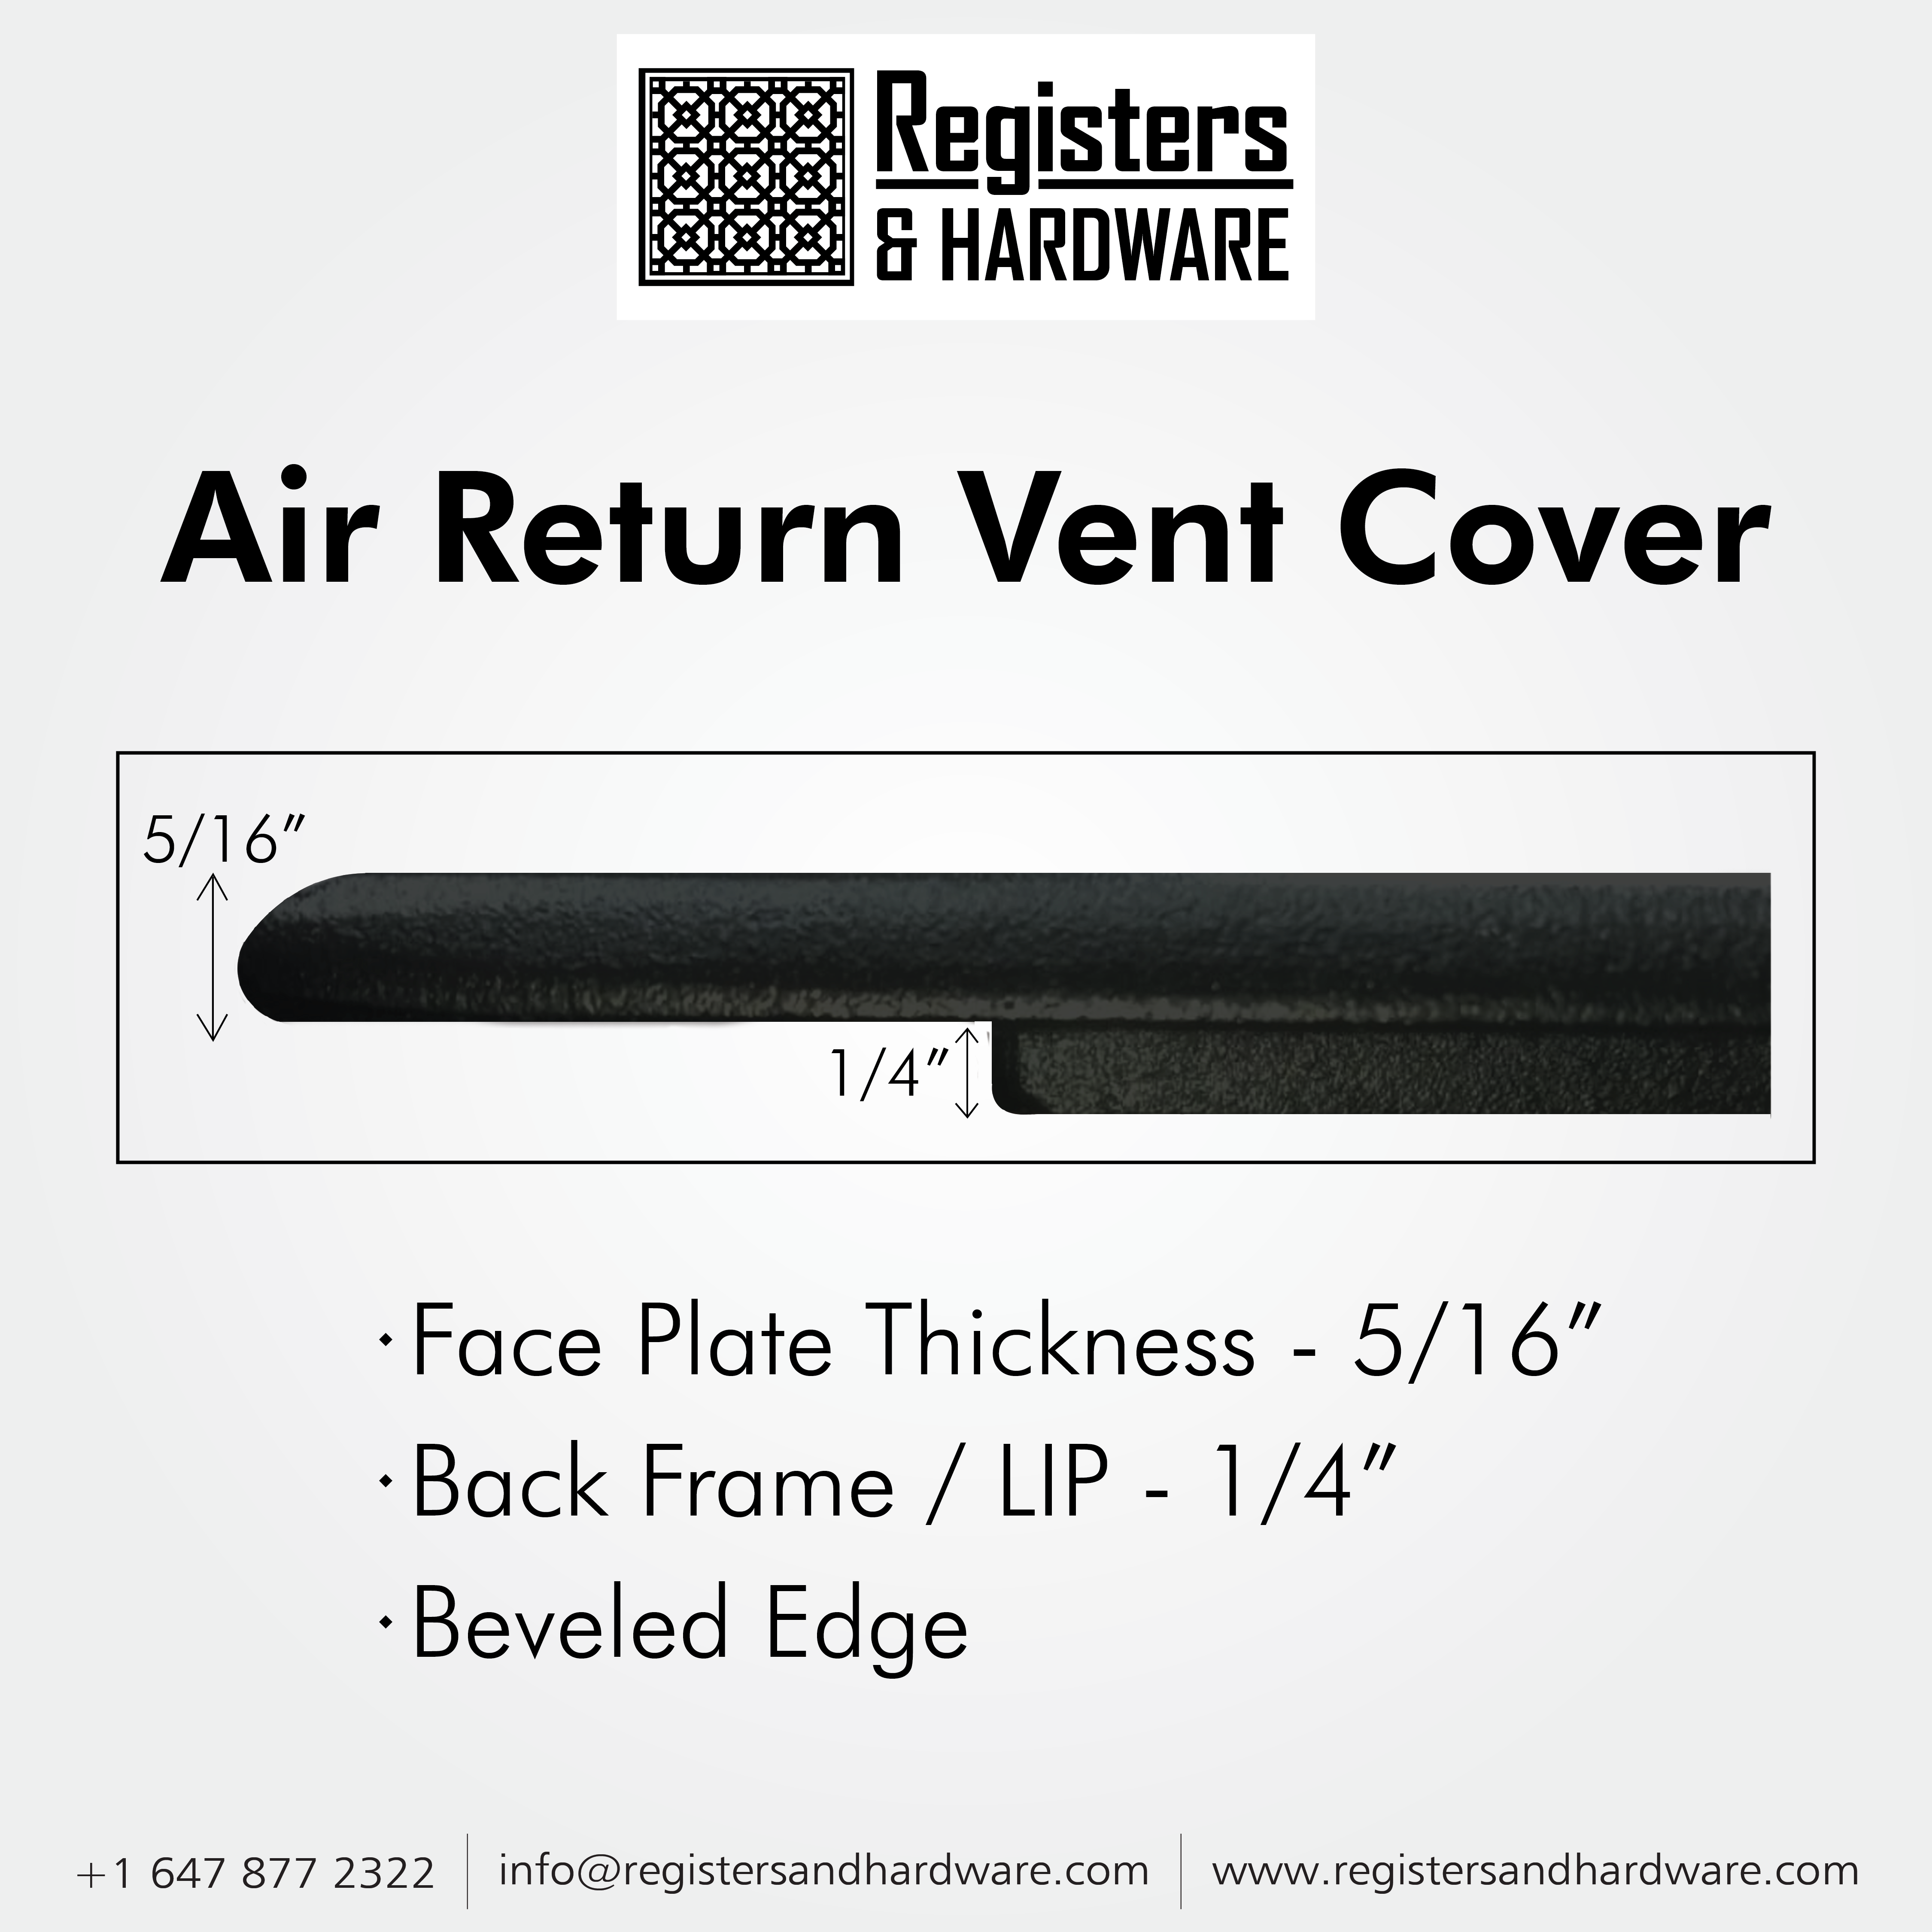 Achtek AIR RETURN 6"x28" Duct Opening (Overall Size 8"x30") | Heavy Cast Aluminum Air Grille HVAC Duct || Powder Coated